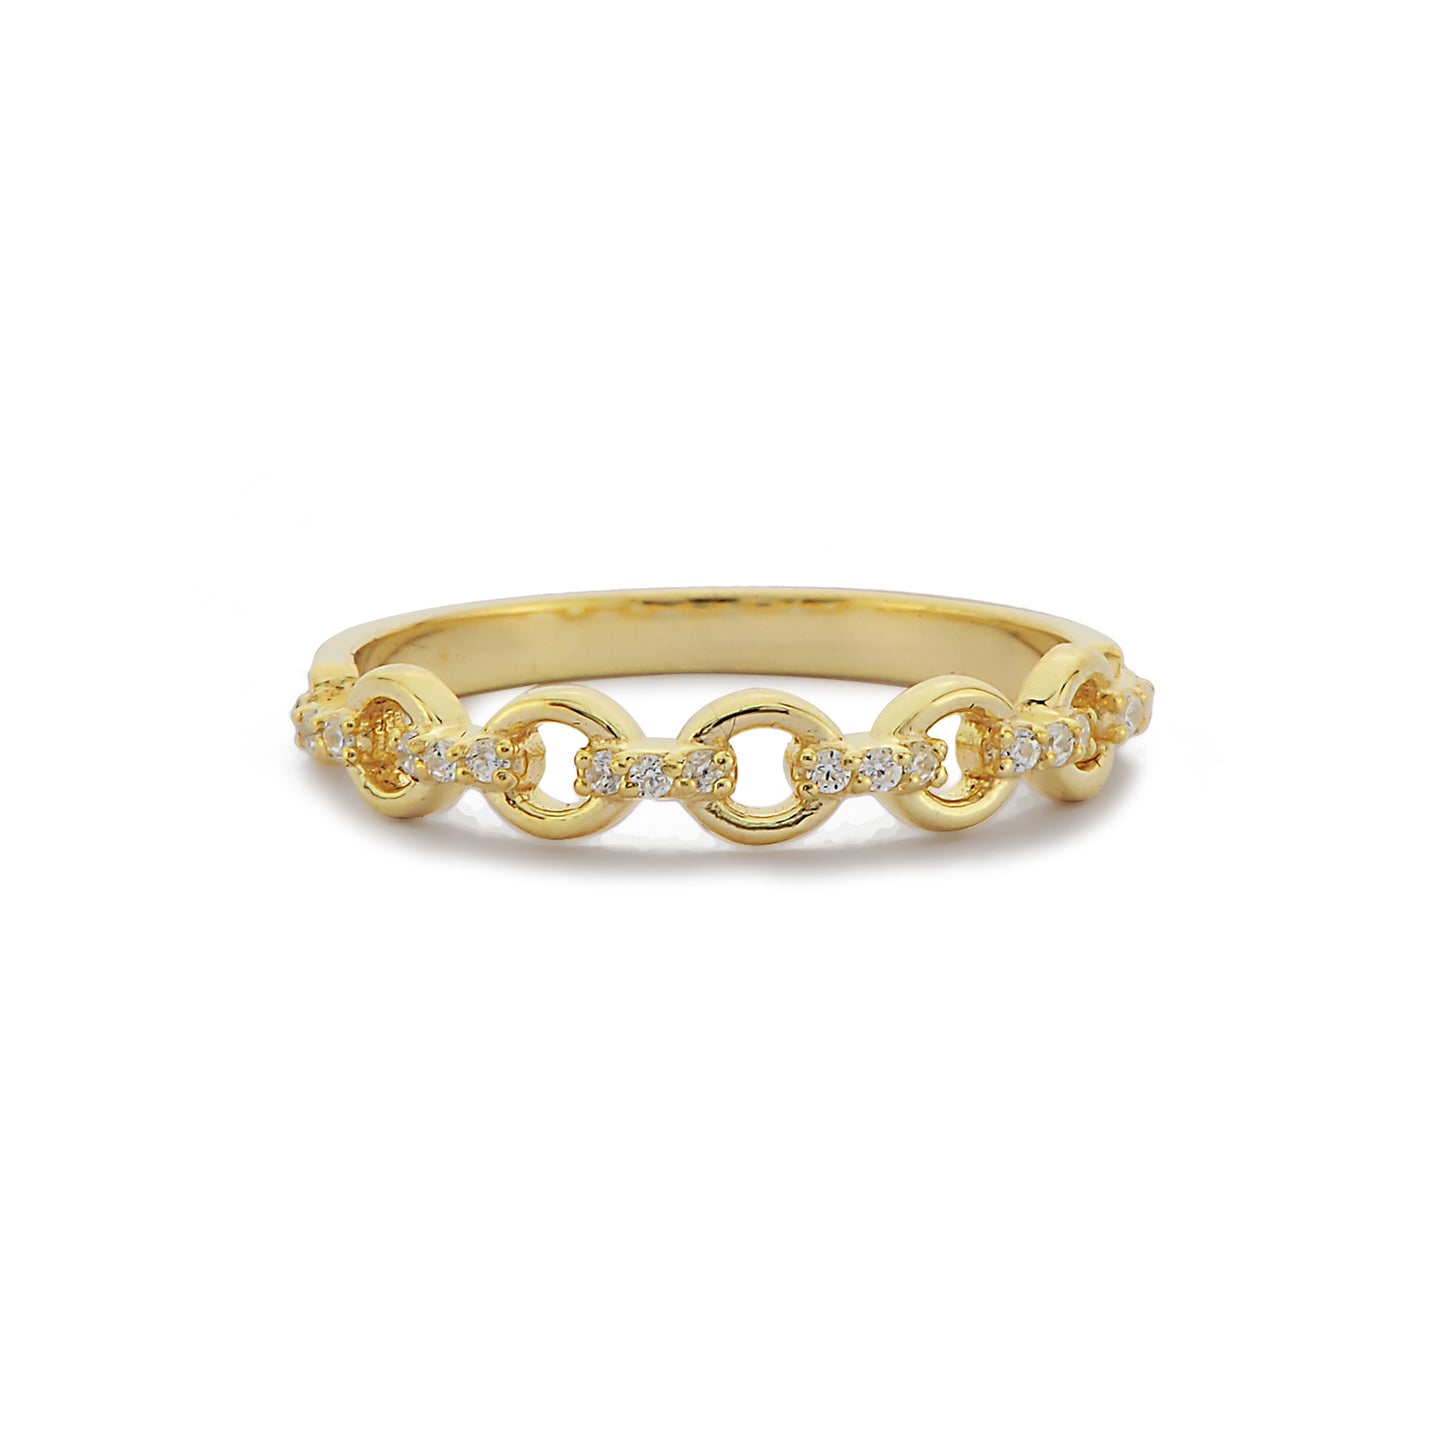 Cuban Chain Diamond Gold Ring / Handmade Chain Link / 14k & 18k Solid Gold Stackable Ring / Dainty and Minimalist Diamond Ring / Trend Ring